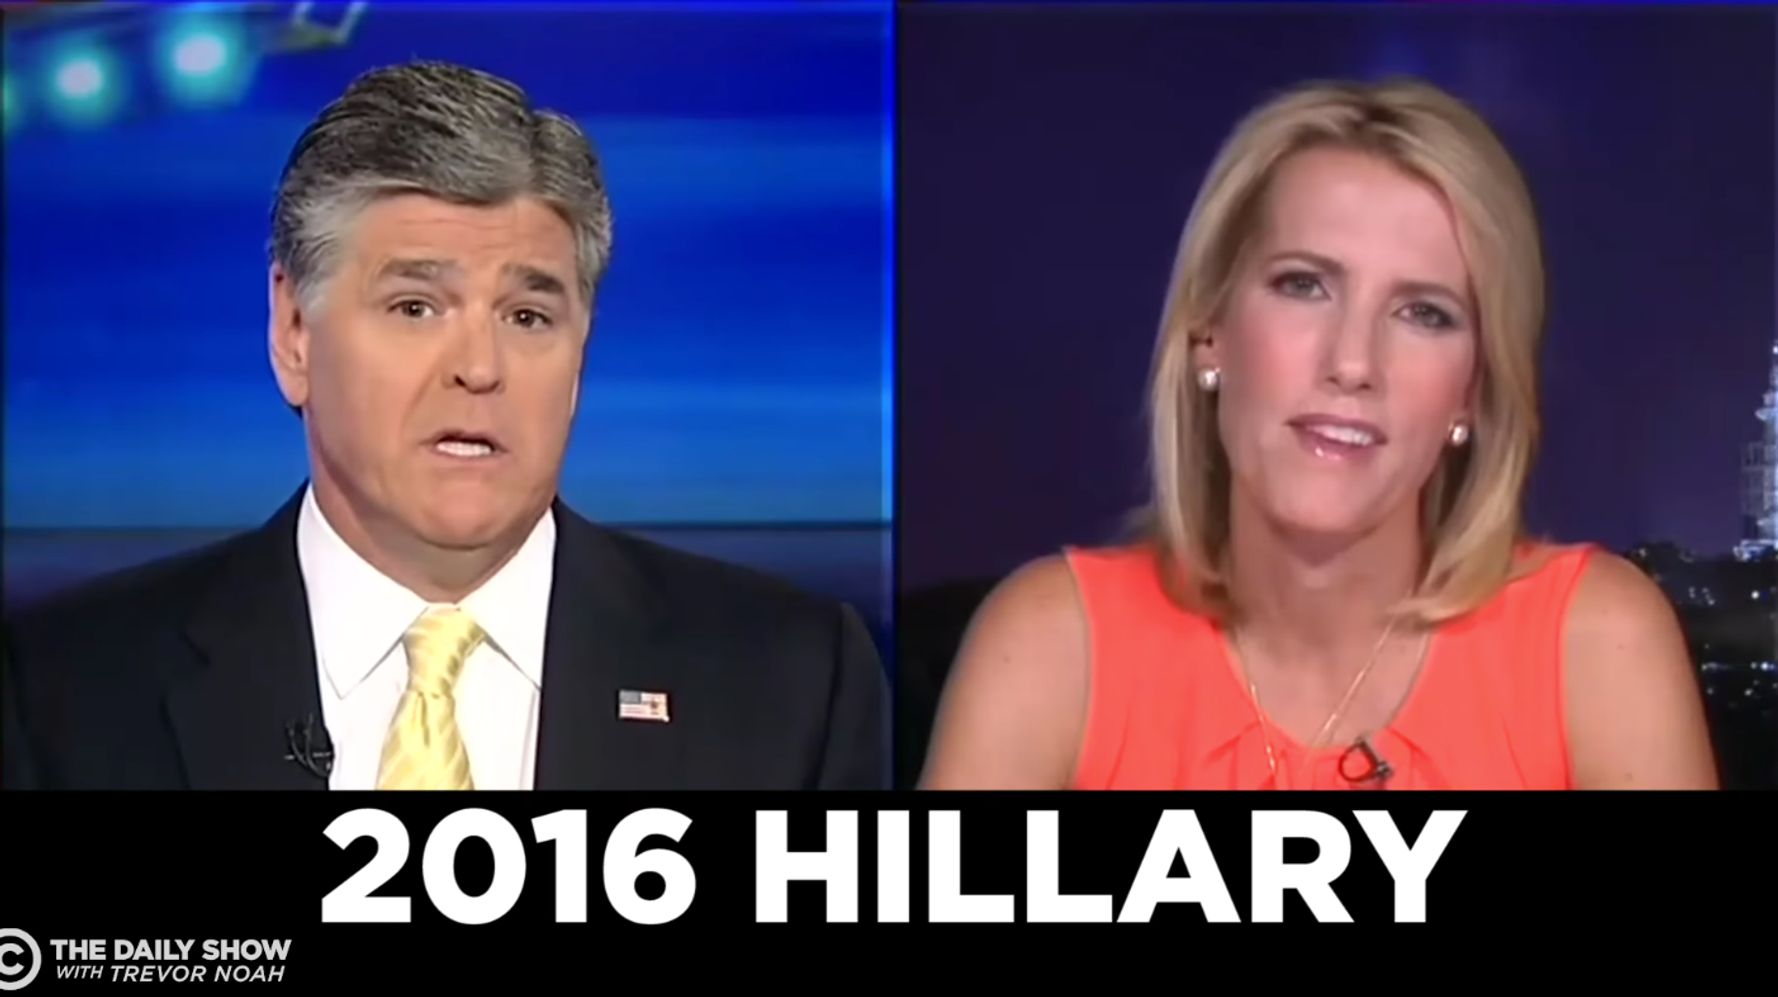 ‘The Daily Show’ Highlights The Strange Pattern In Sean Hannity’s Election Coverage